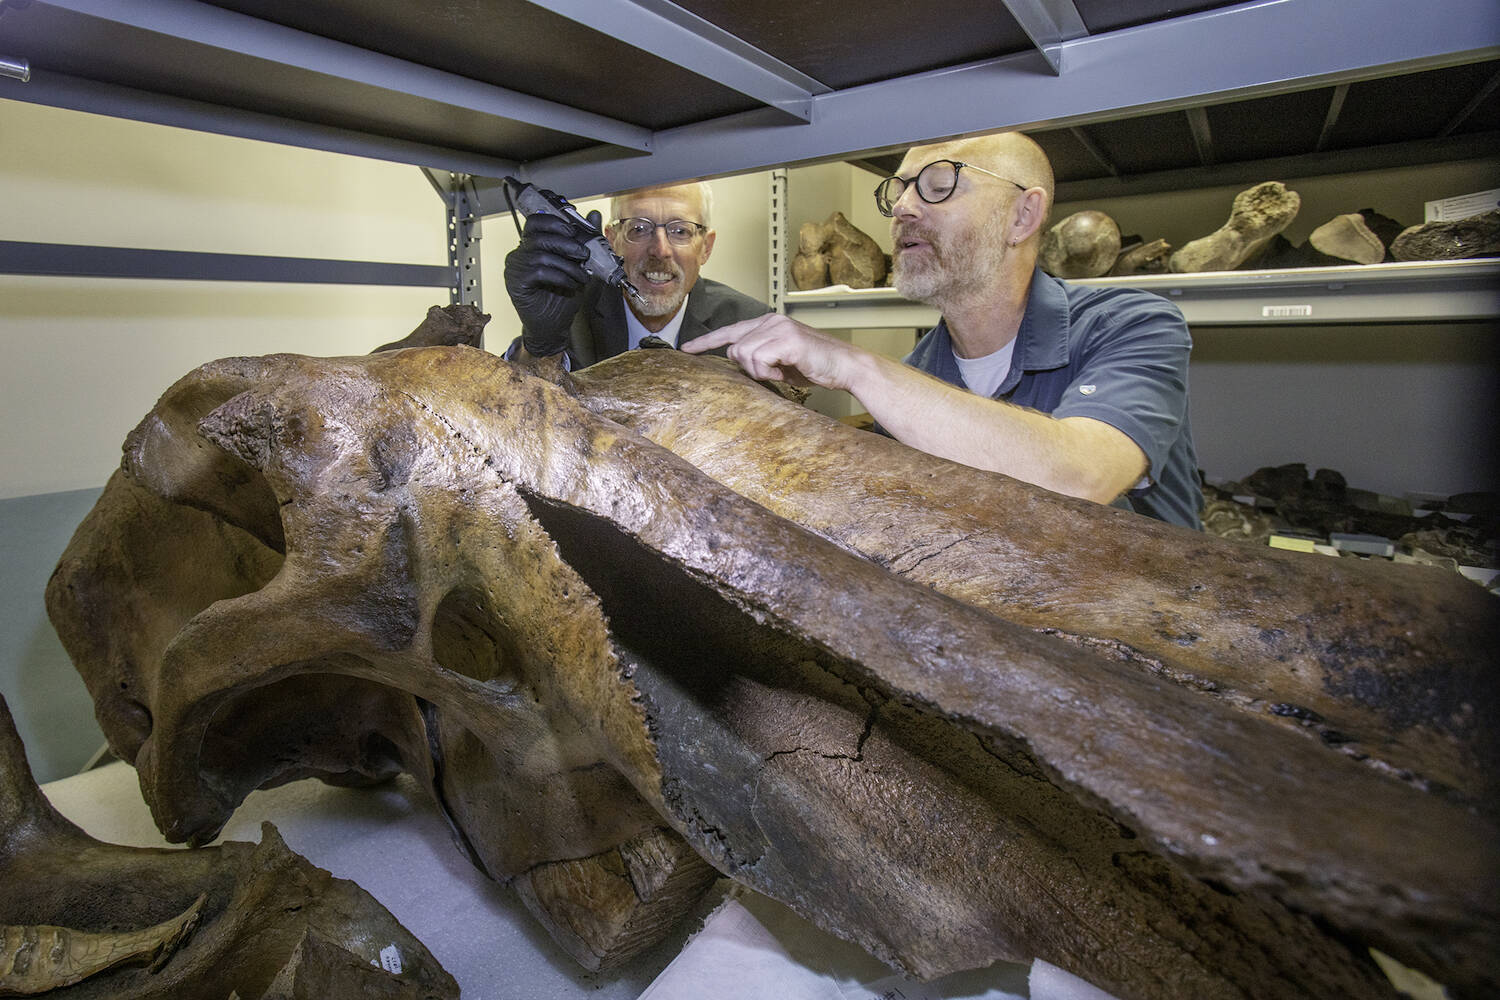 UAF Chancellor Dan White pretends to take a sample from a mammoth skull with the help of Matthew Wooller to promote the Adopt a Mammoth Program at the Museum of the North on the UAF campus on Aug. 5, 2022.